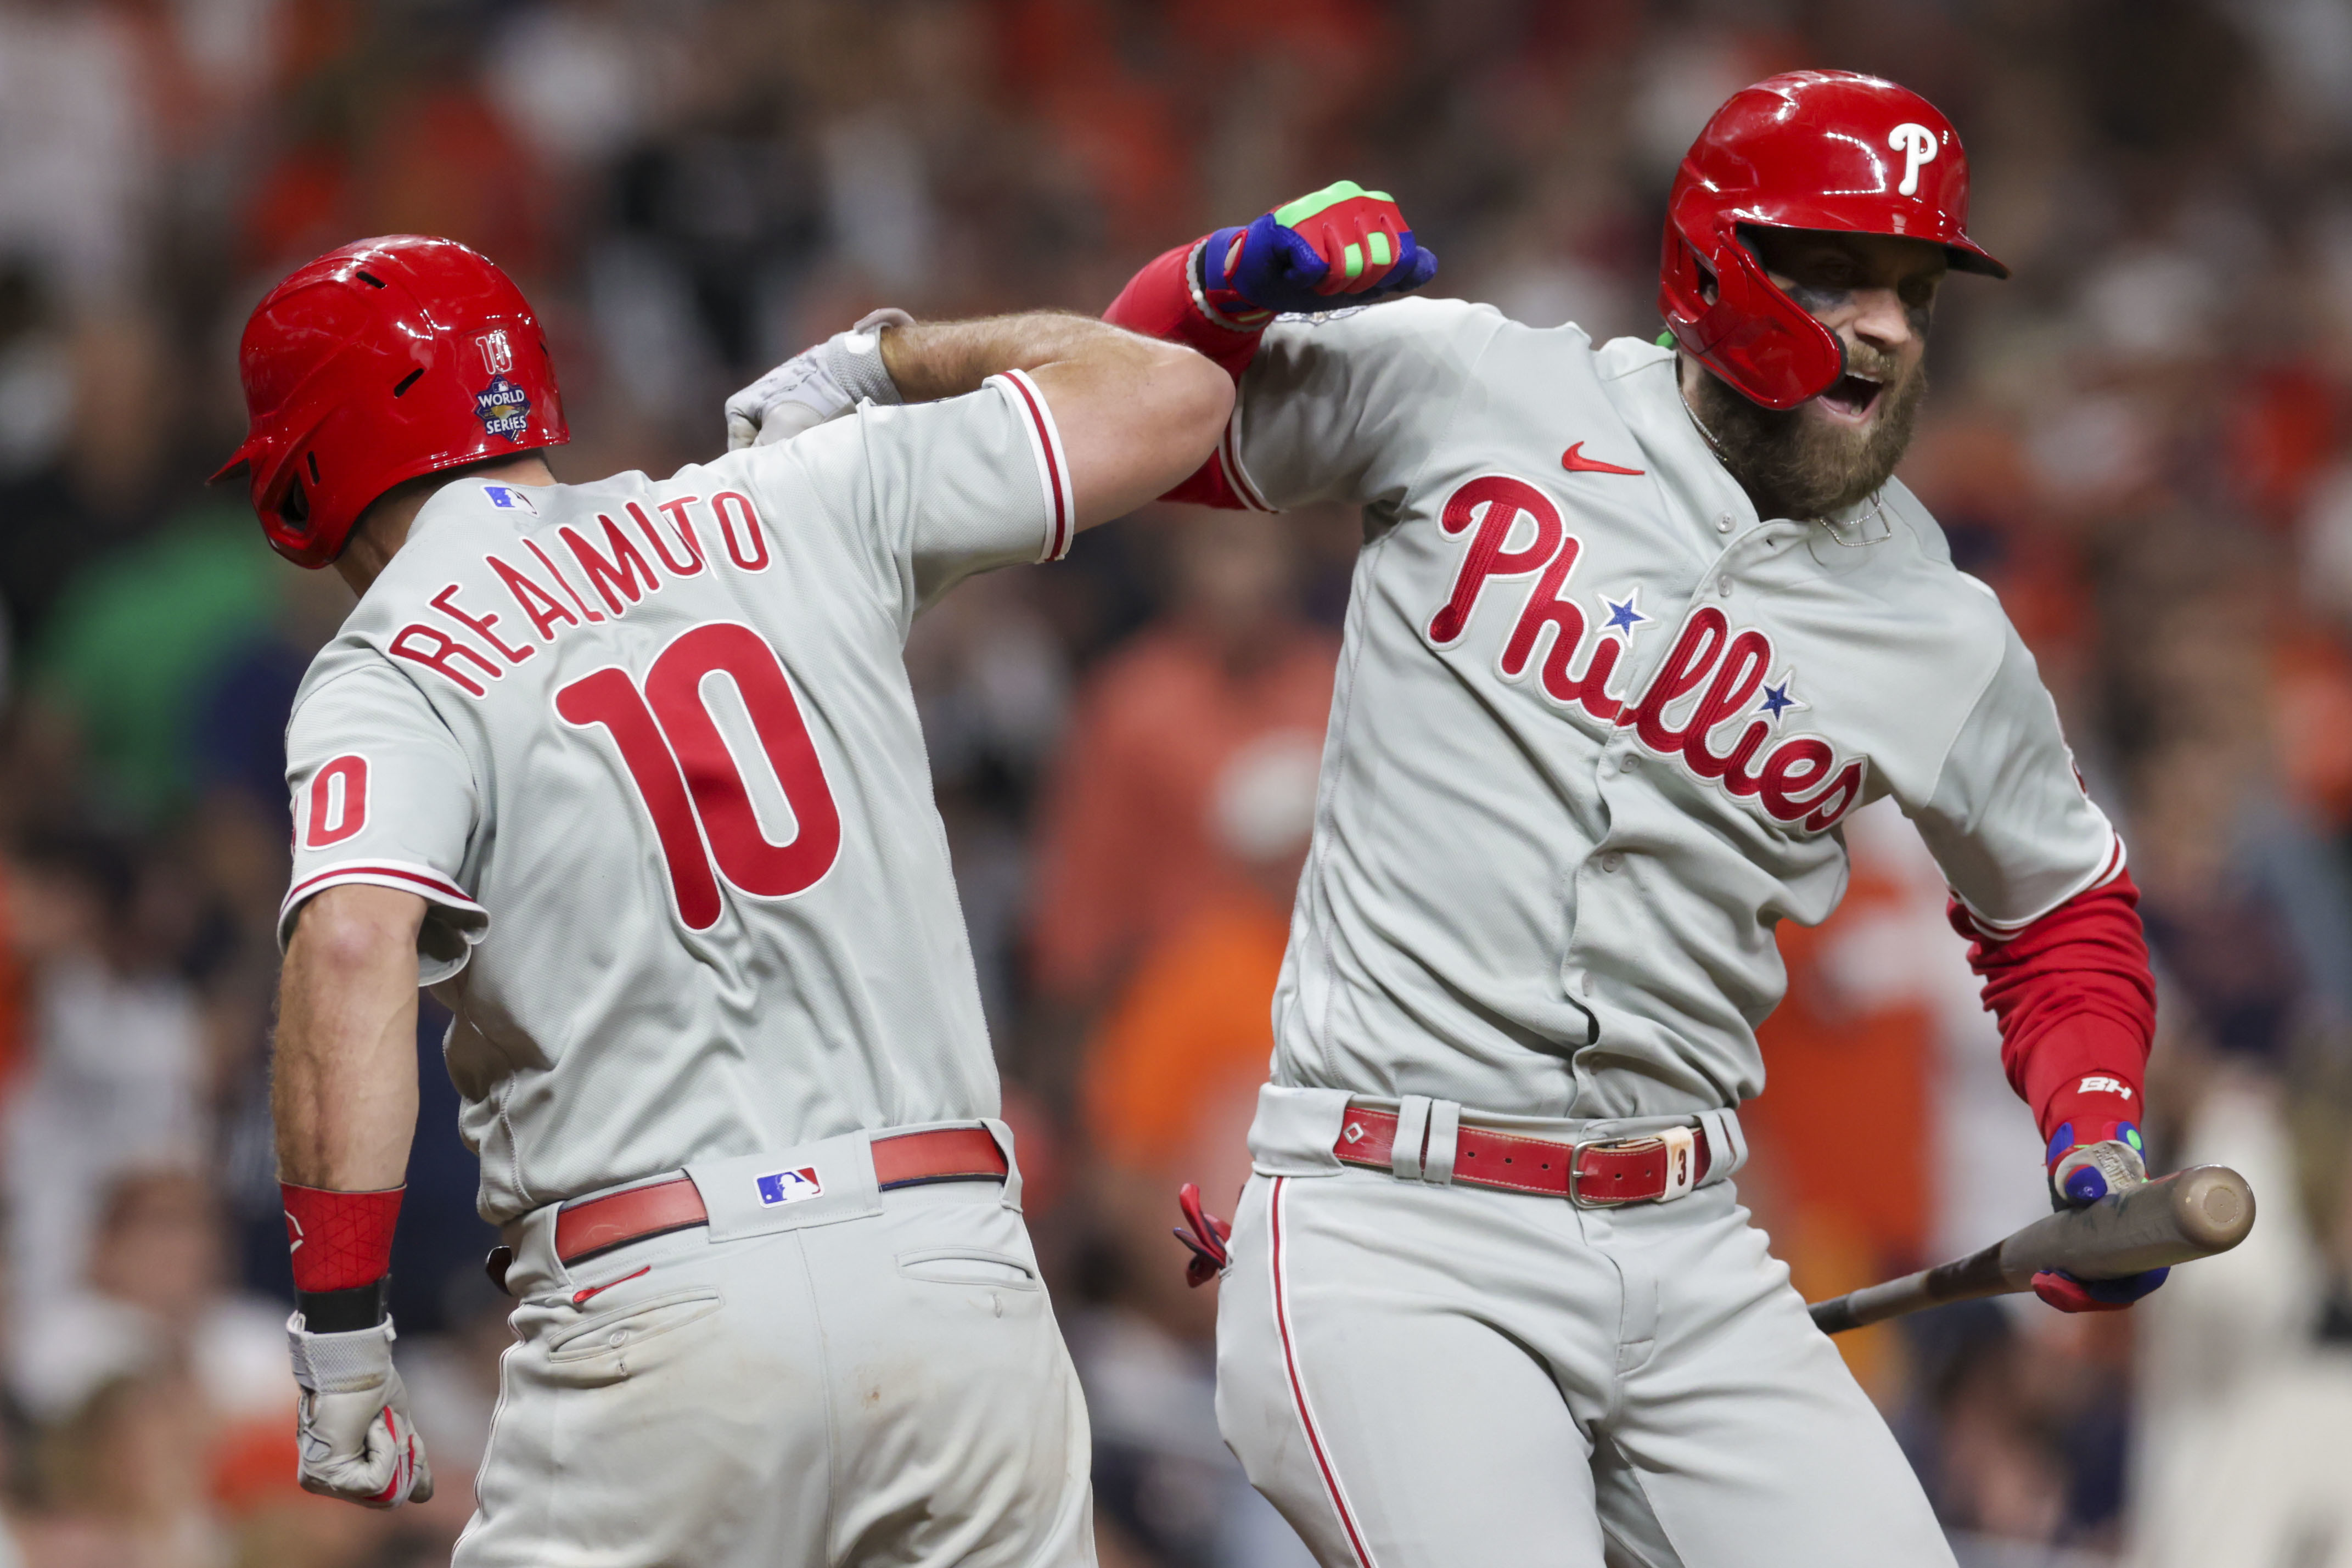 MLB playoffs 2022 - Nola brothers duel in Phillies-Padres Game 2 - ESPN